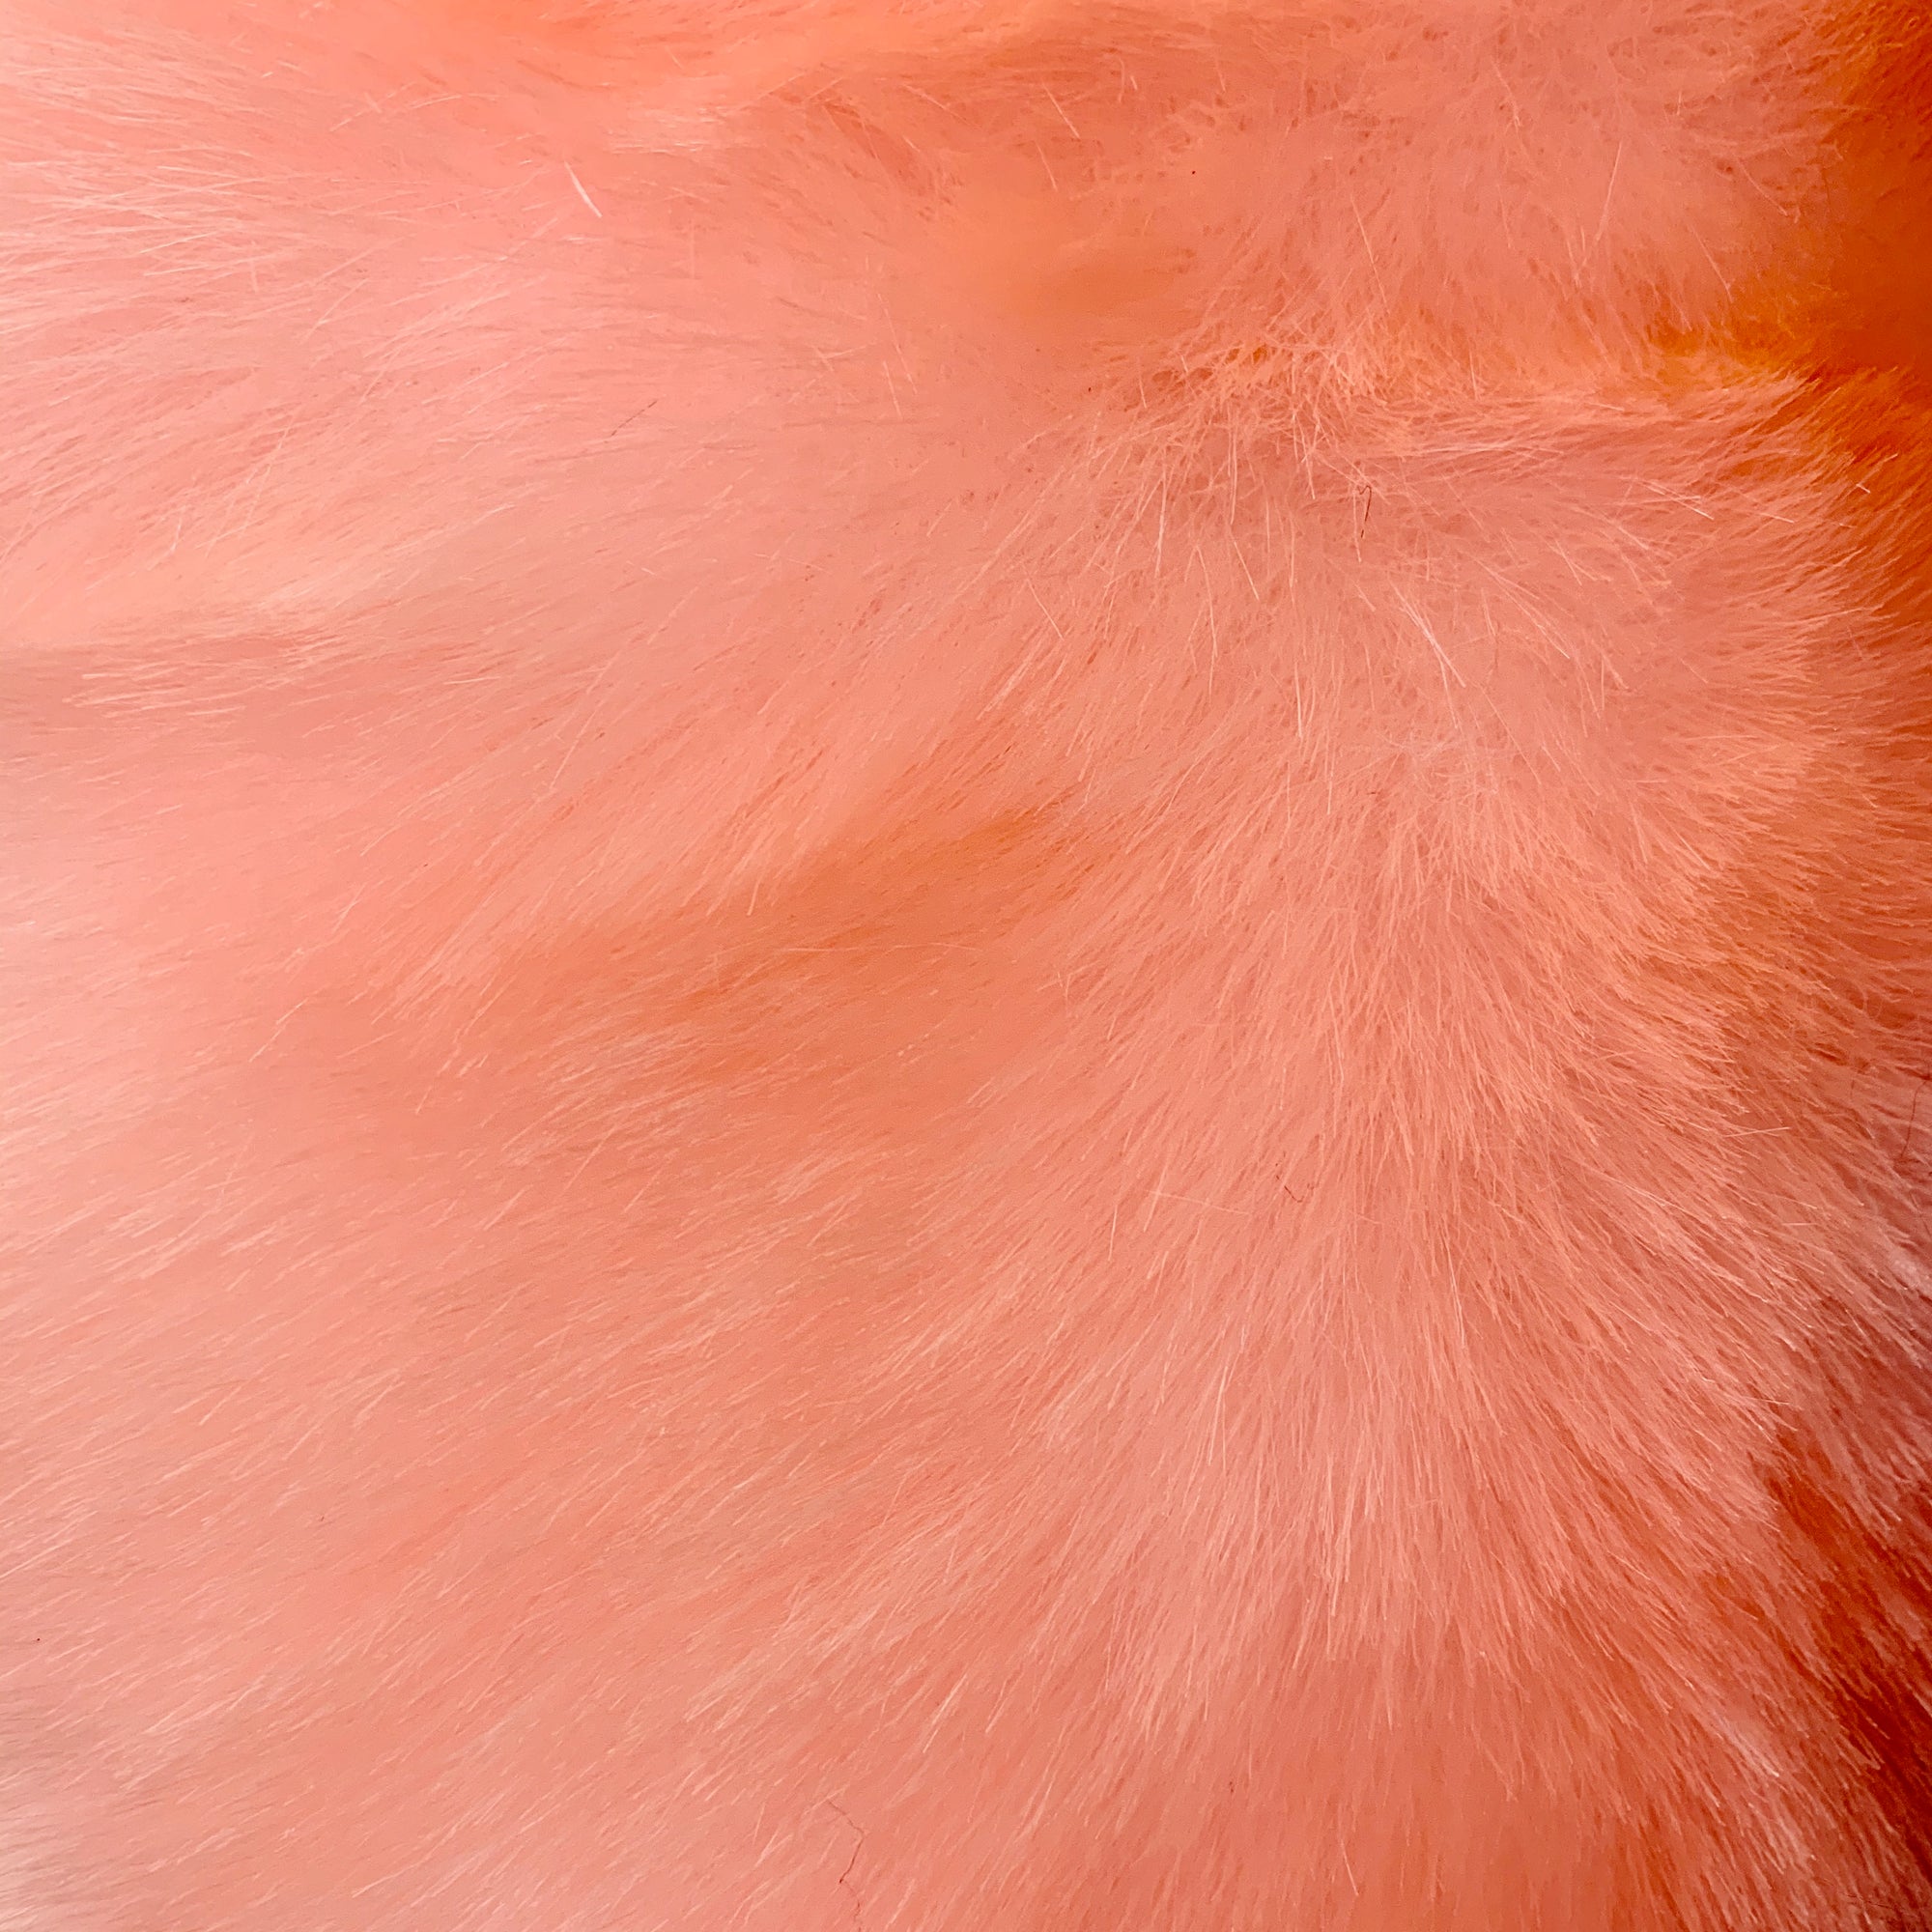 Zahra LIGHT CORAL 0.75 Inch Short Pile Soft Faux Fur Fabric for Fursuit, Cosplay Costume, Photo Prop, Trim, Throw Pillow, Crafts